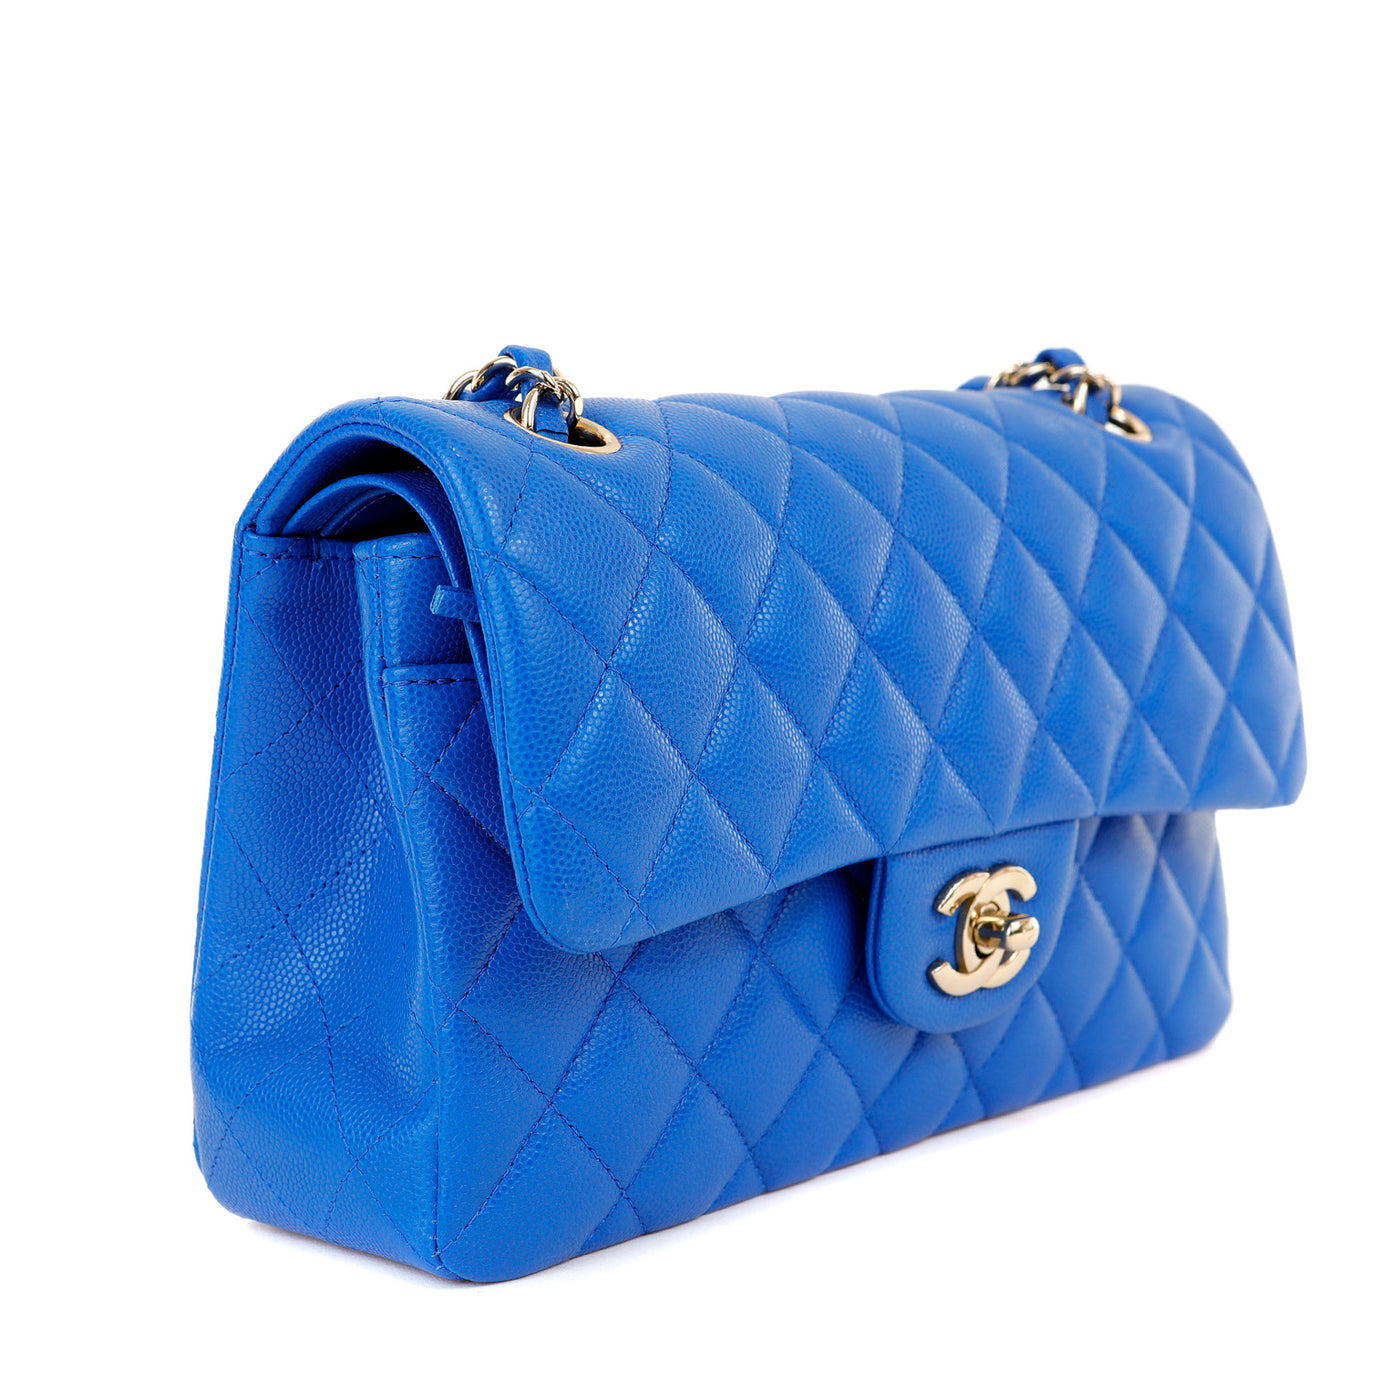 The Roo Pouch | Electric Blue | Policy Handbags | Clear Bag Policy |  Stadium Approved Bags - POLICY Handbags